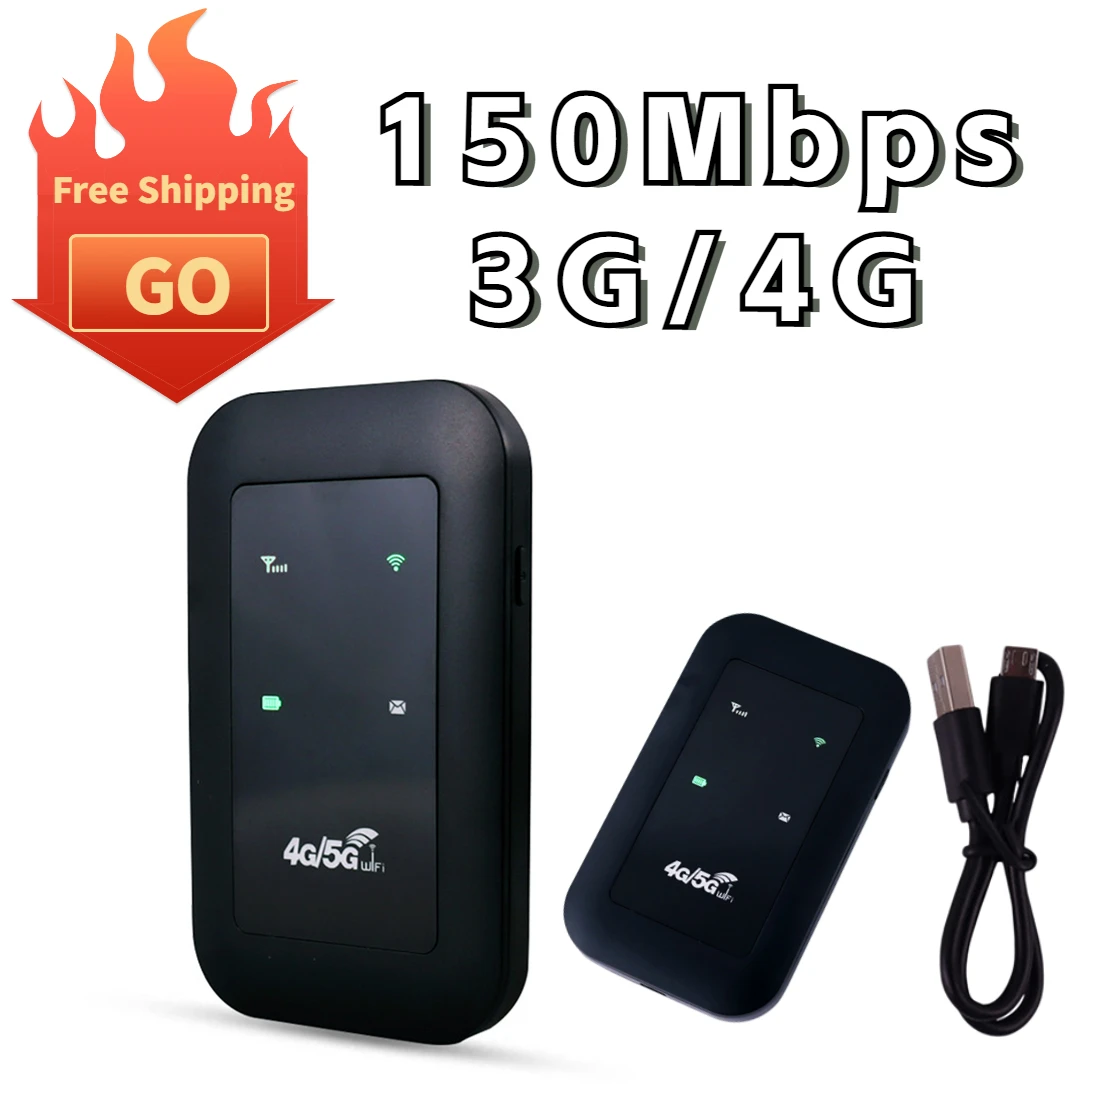 

150Mbps WiFi Repeater 4G LTE Router Signal Amplifier Network Expander Adaptor 3G/4G SIM Card Slot Extender Modem Dongle